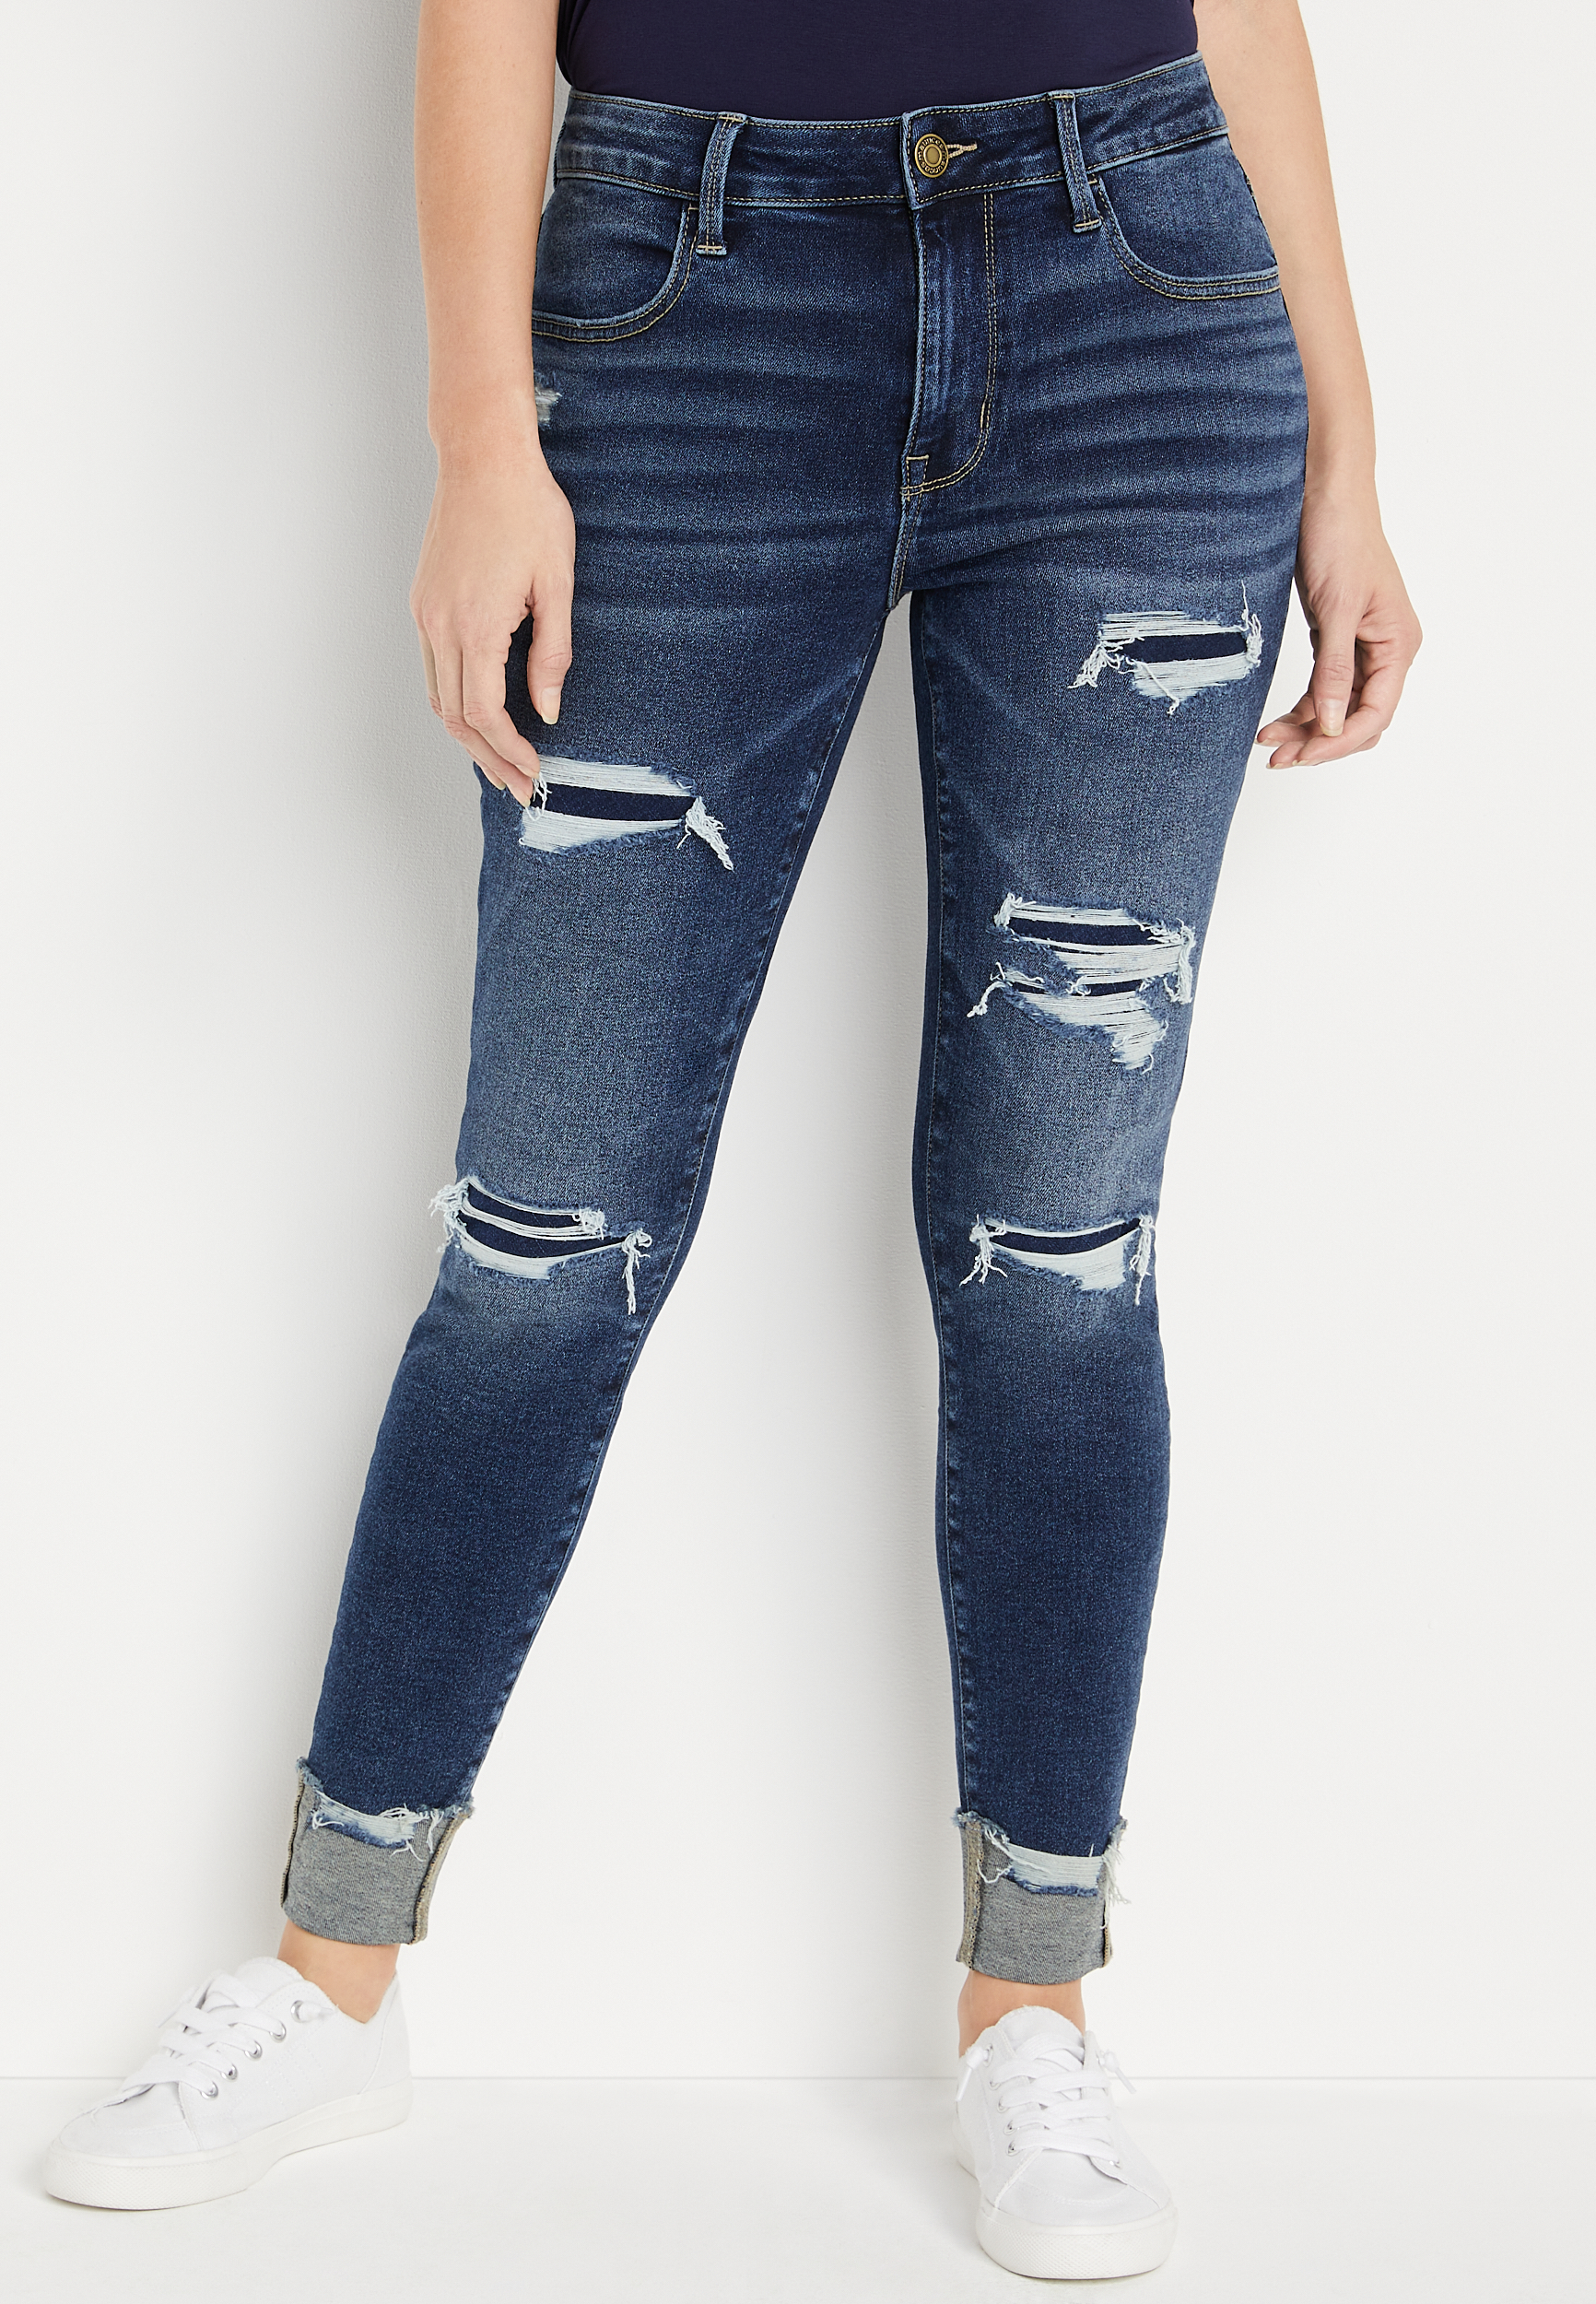 m jeans by maurices™ Vintage High Rise Cuffed Jegging | maurices